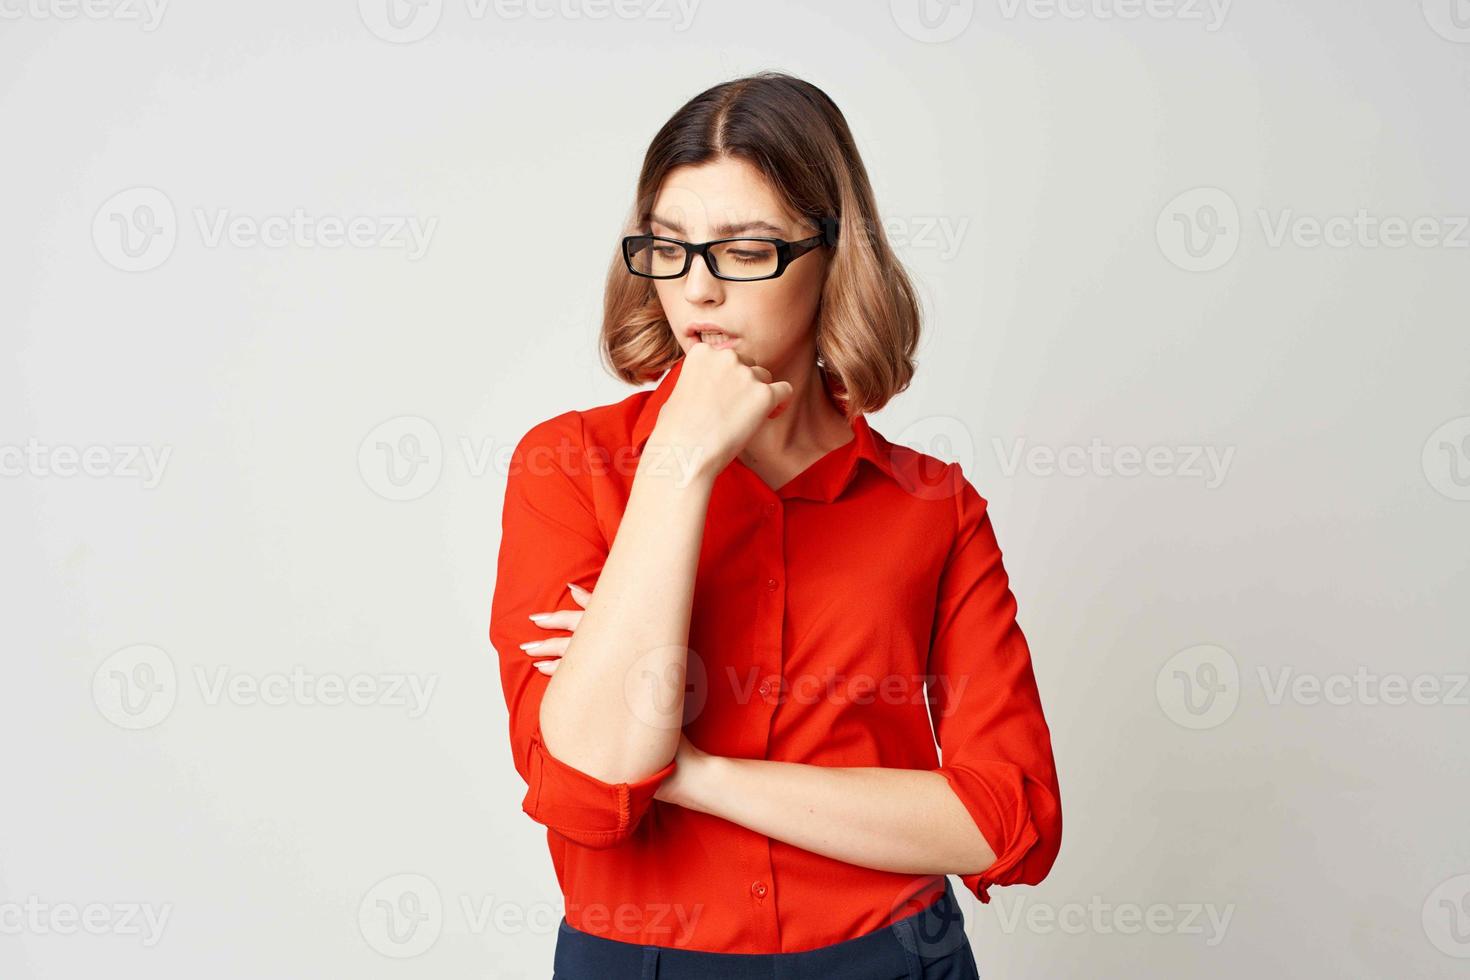 woman in business suit job manager office business photo